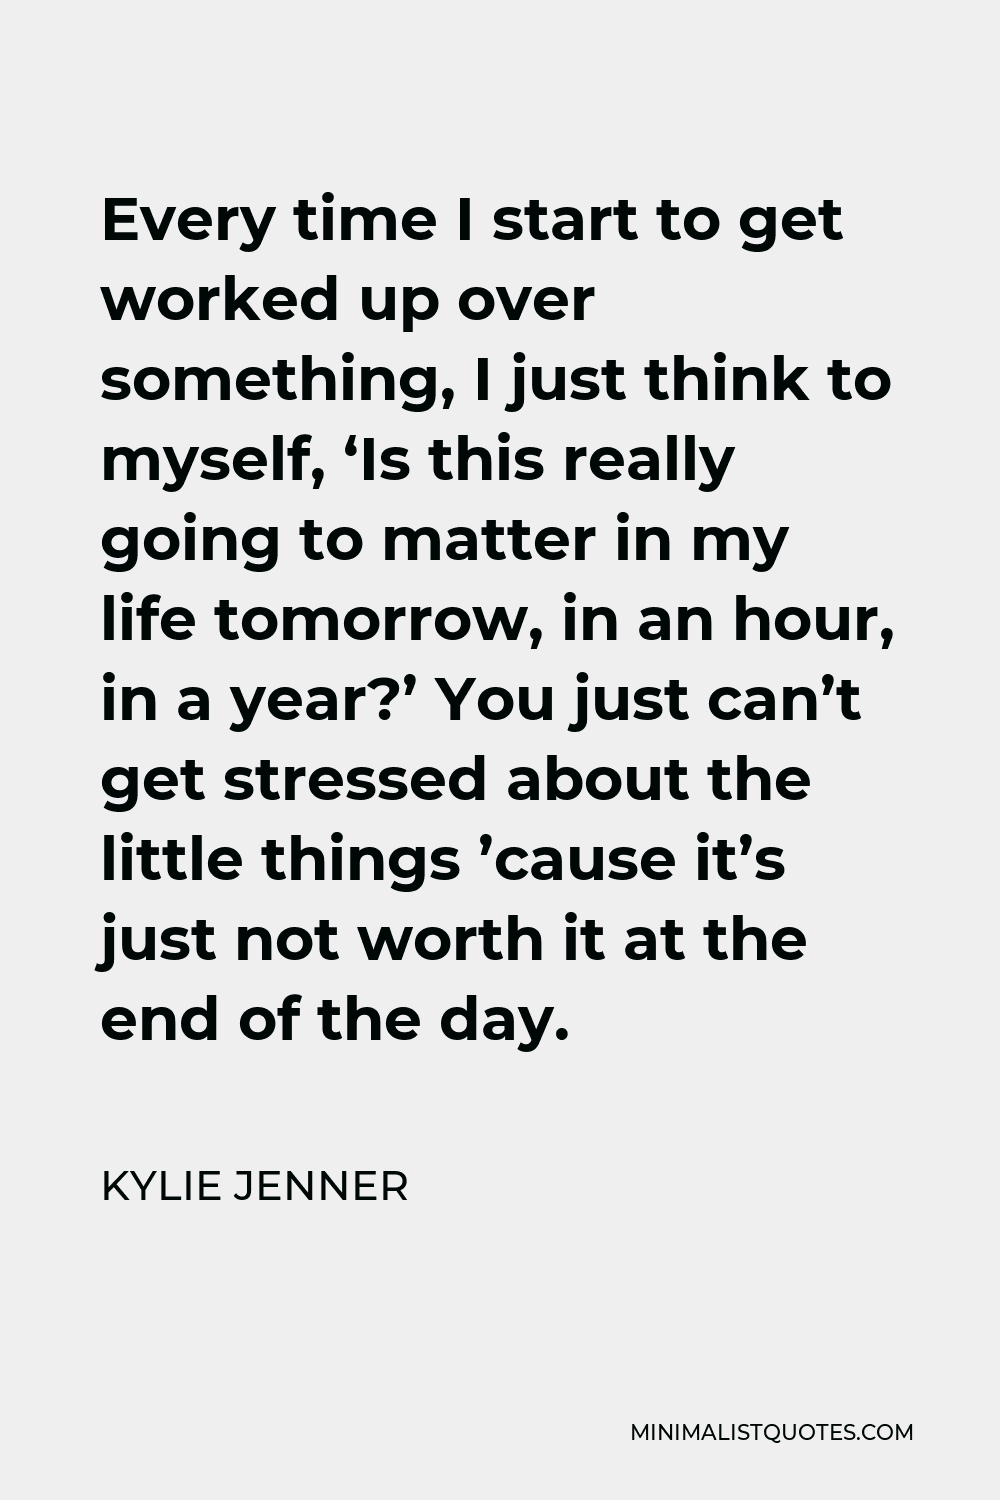 Kylie Jenner Quote - Every time I start to get worked up over something, I just think to myself, ‘Is this really going to matter in my life tomorrow, in an hour, in a year?’ You just can’t get stressed about the little things ’cause it’s just not worth it at the end of the day.